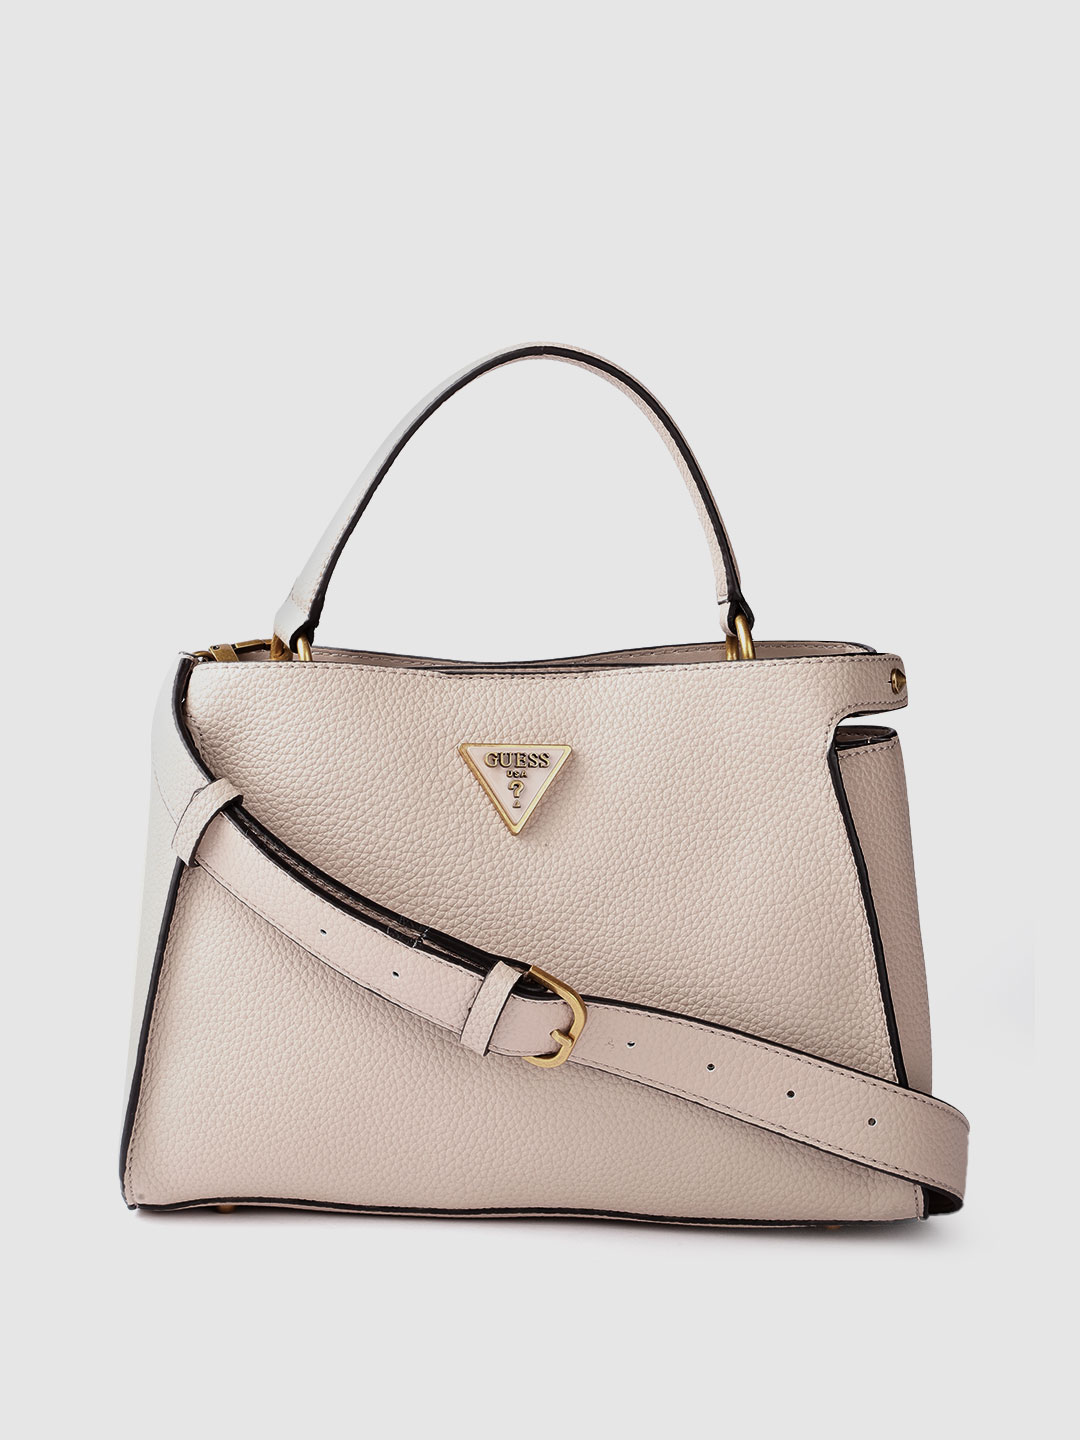 GUESS Peach-Coloured Textured Structured Handheld Bag Price in India